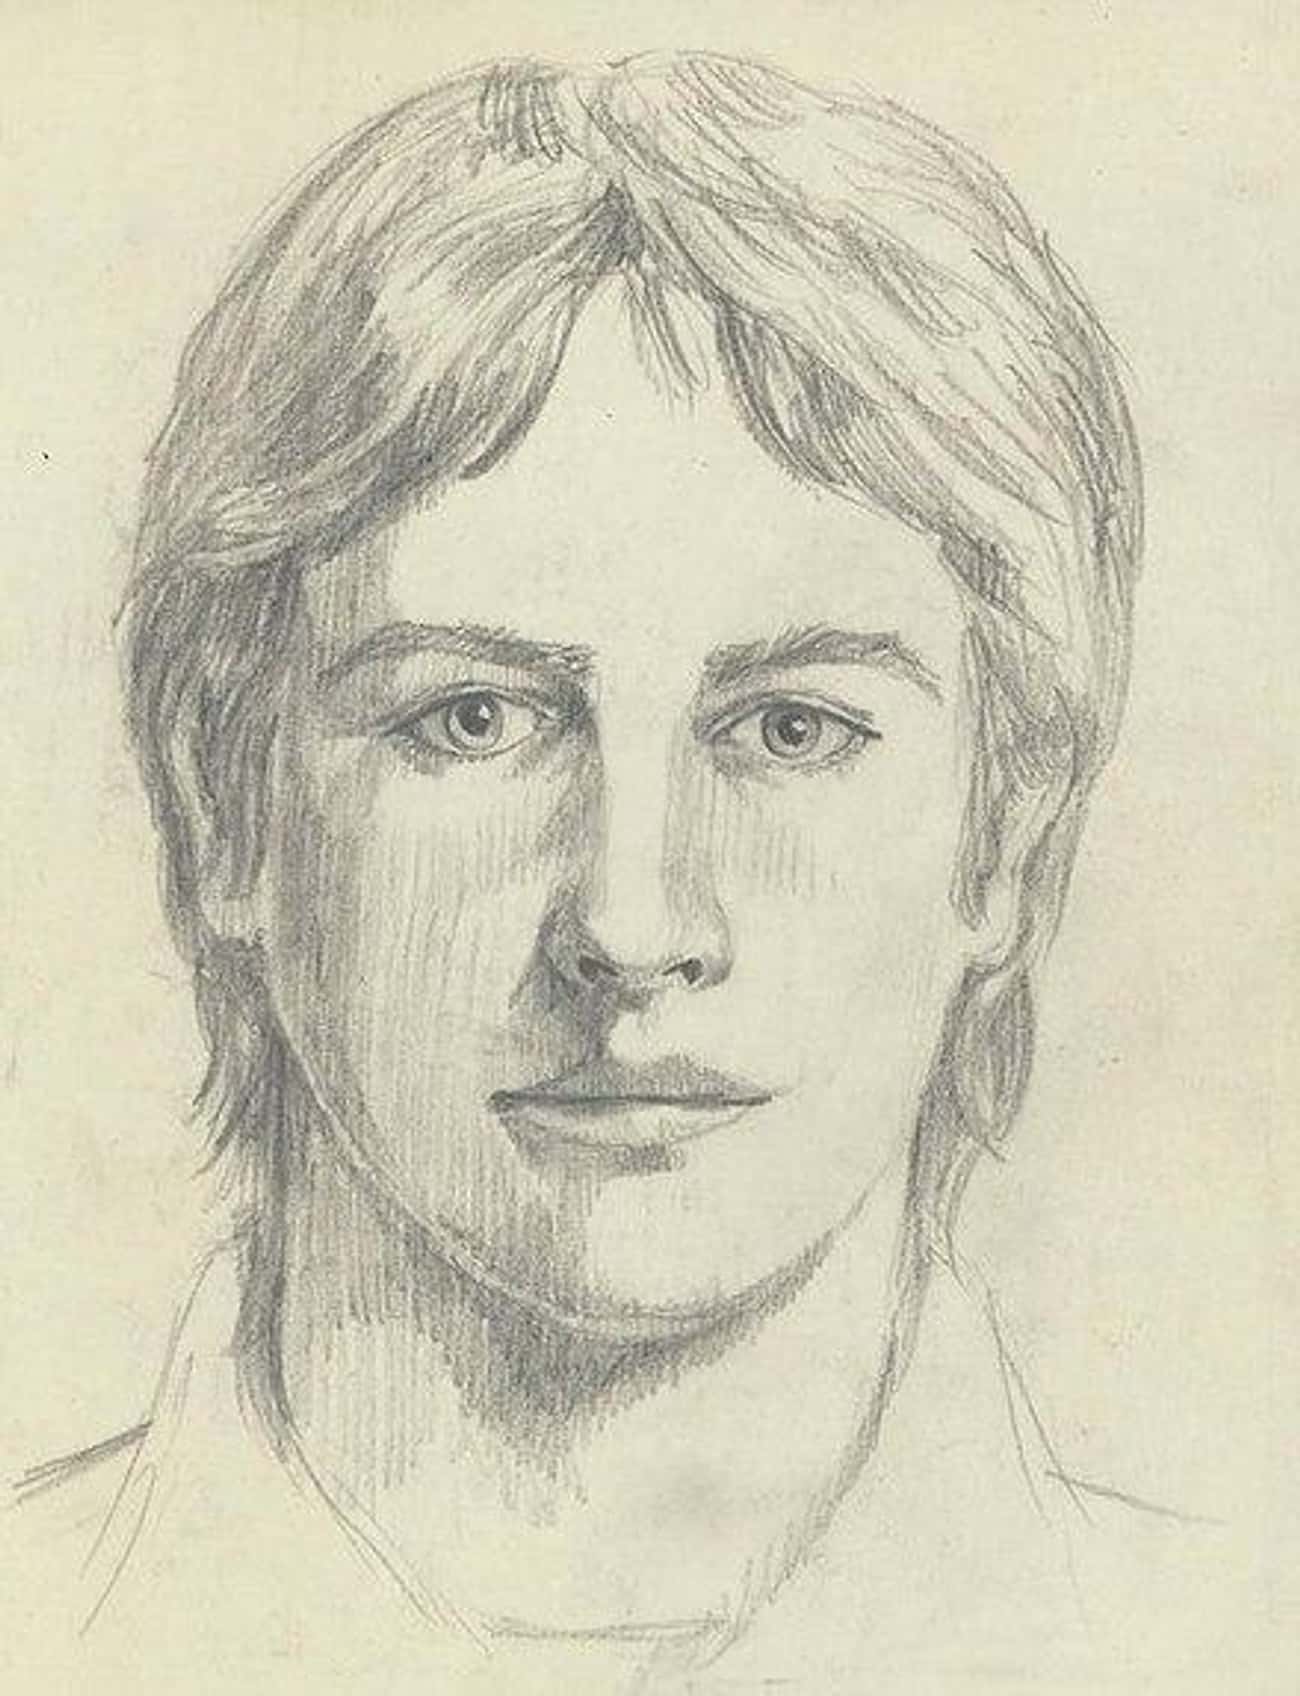 The Golden State Killer Remained At Large For Decades